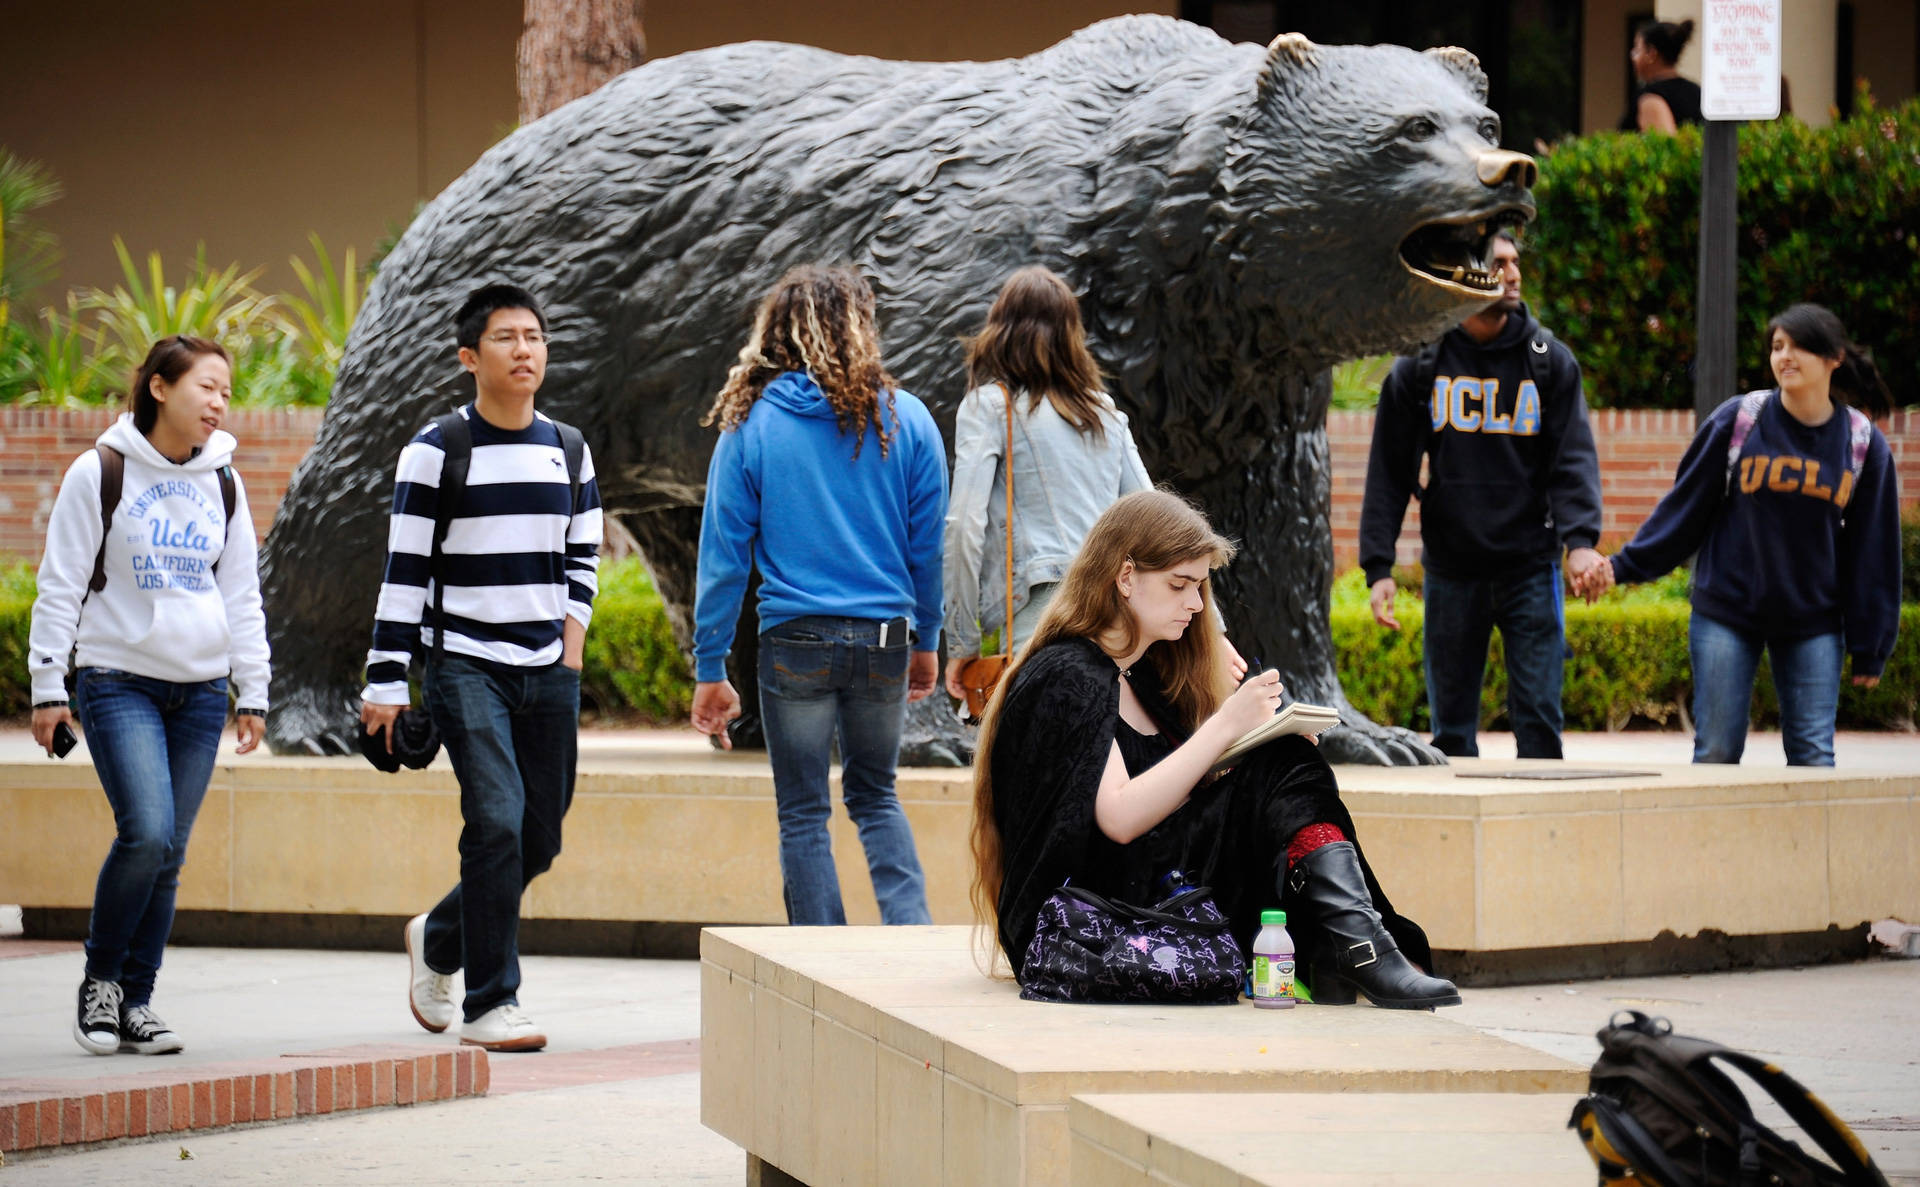 Students walk near the Bruin Bear statue on the UCLA campus. Kevork Djansezian/Getty Images